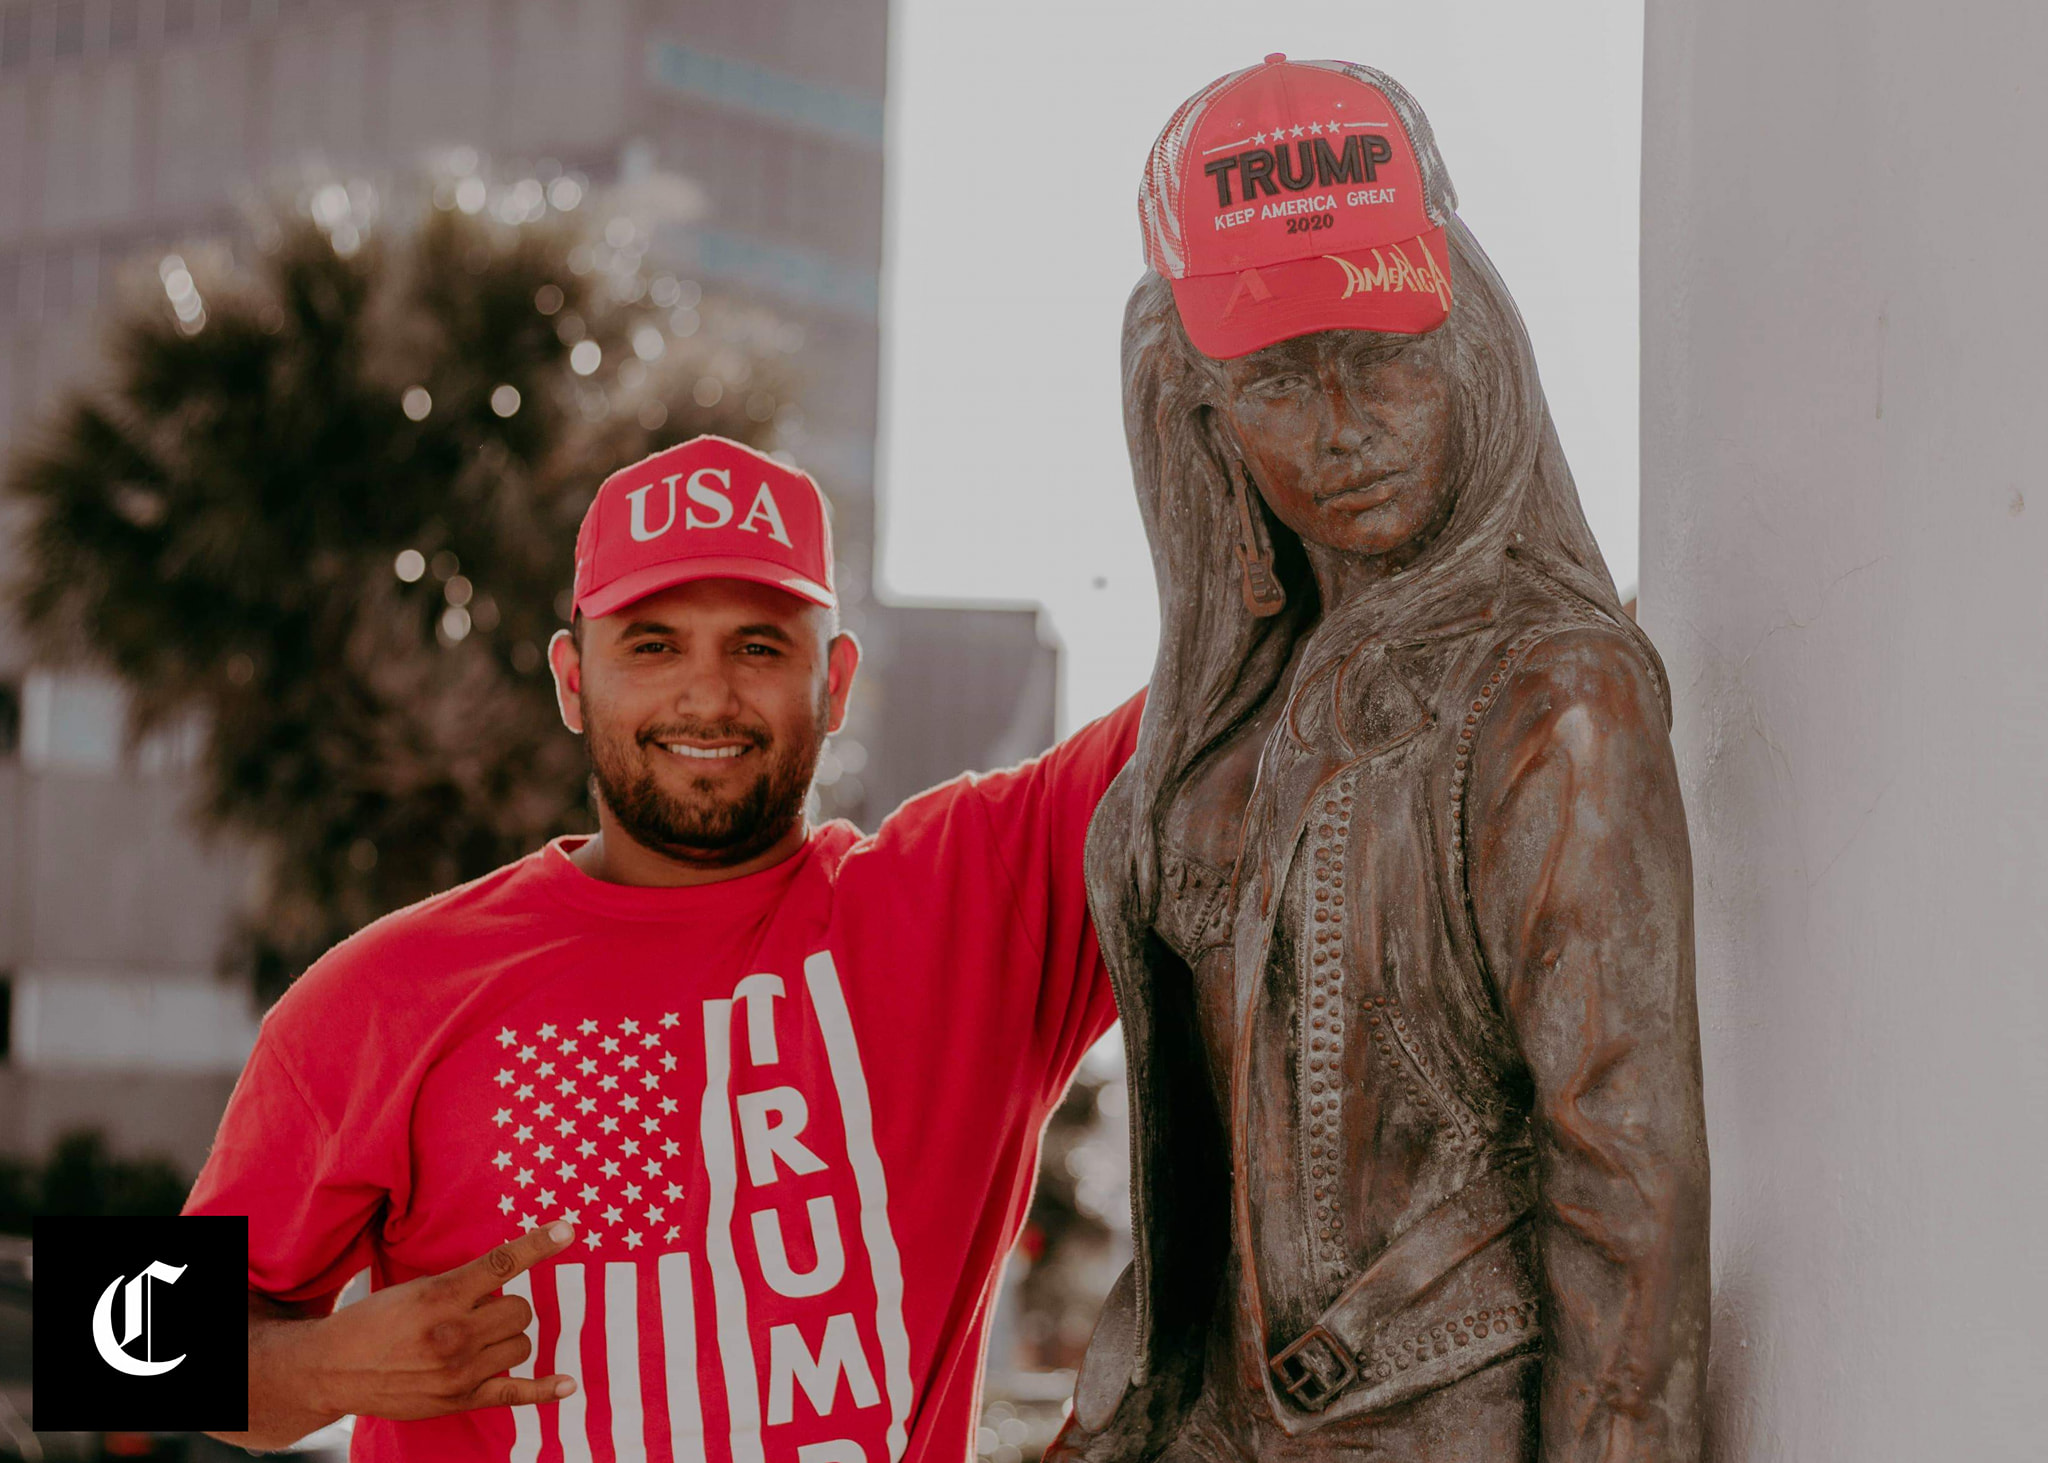 Photo of Selena statue wearing Trump hat sparks outrage